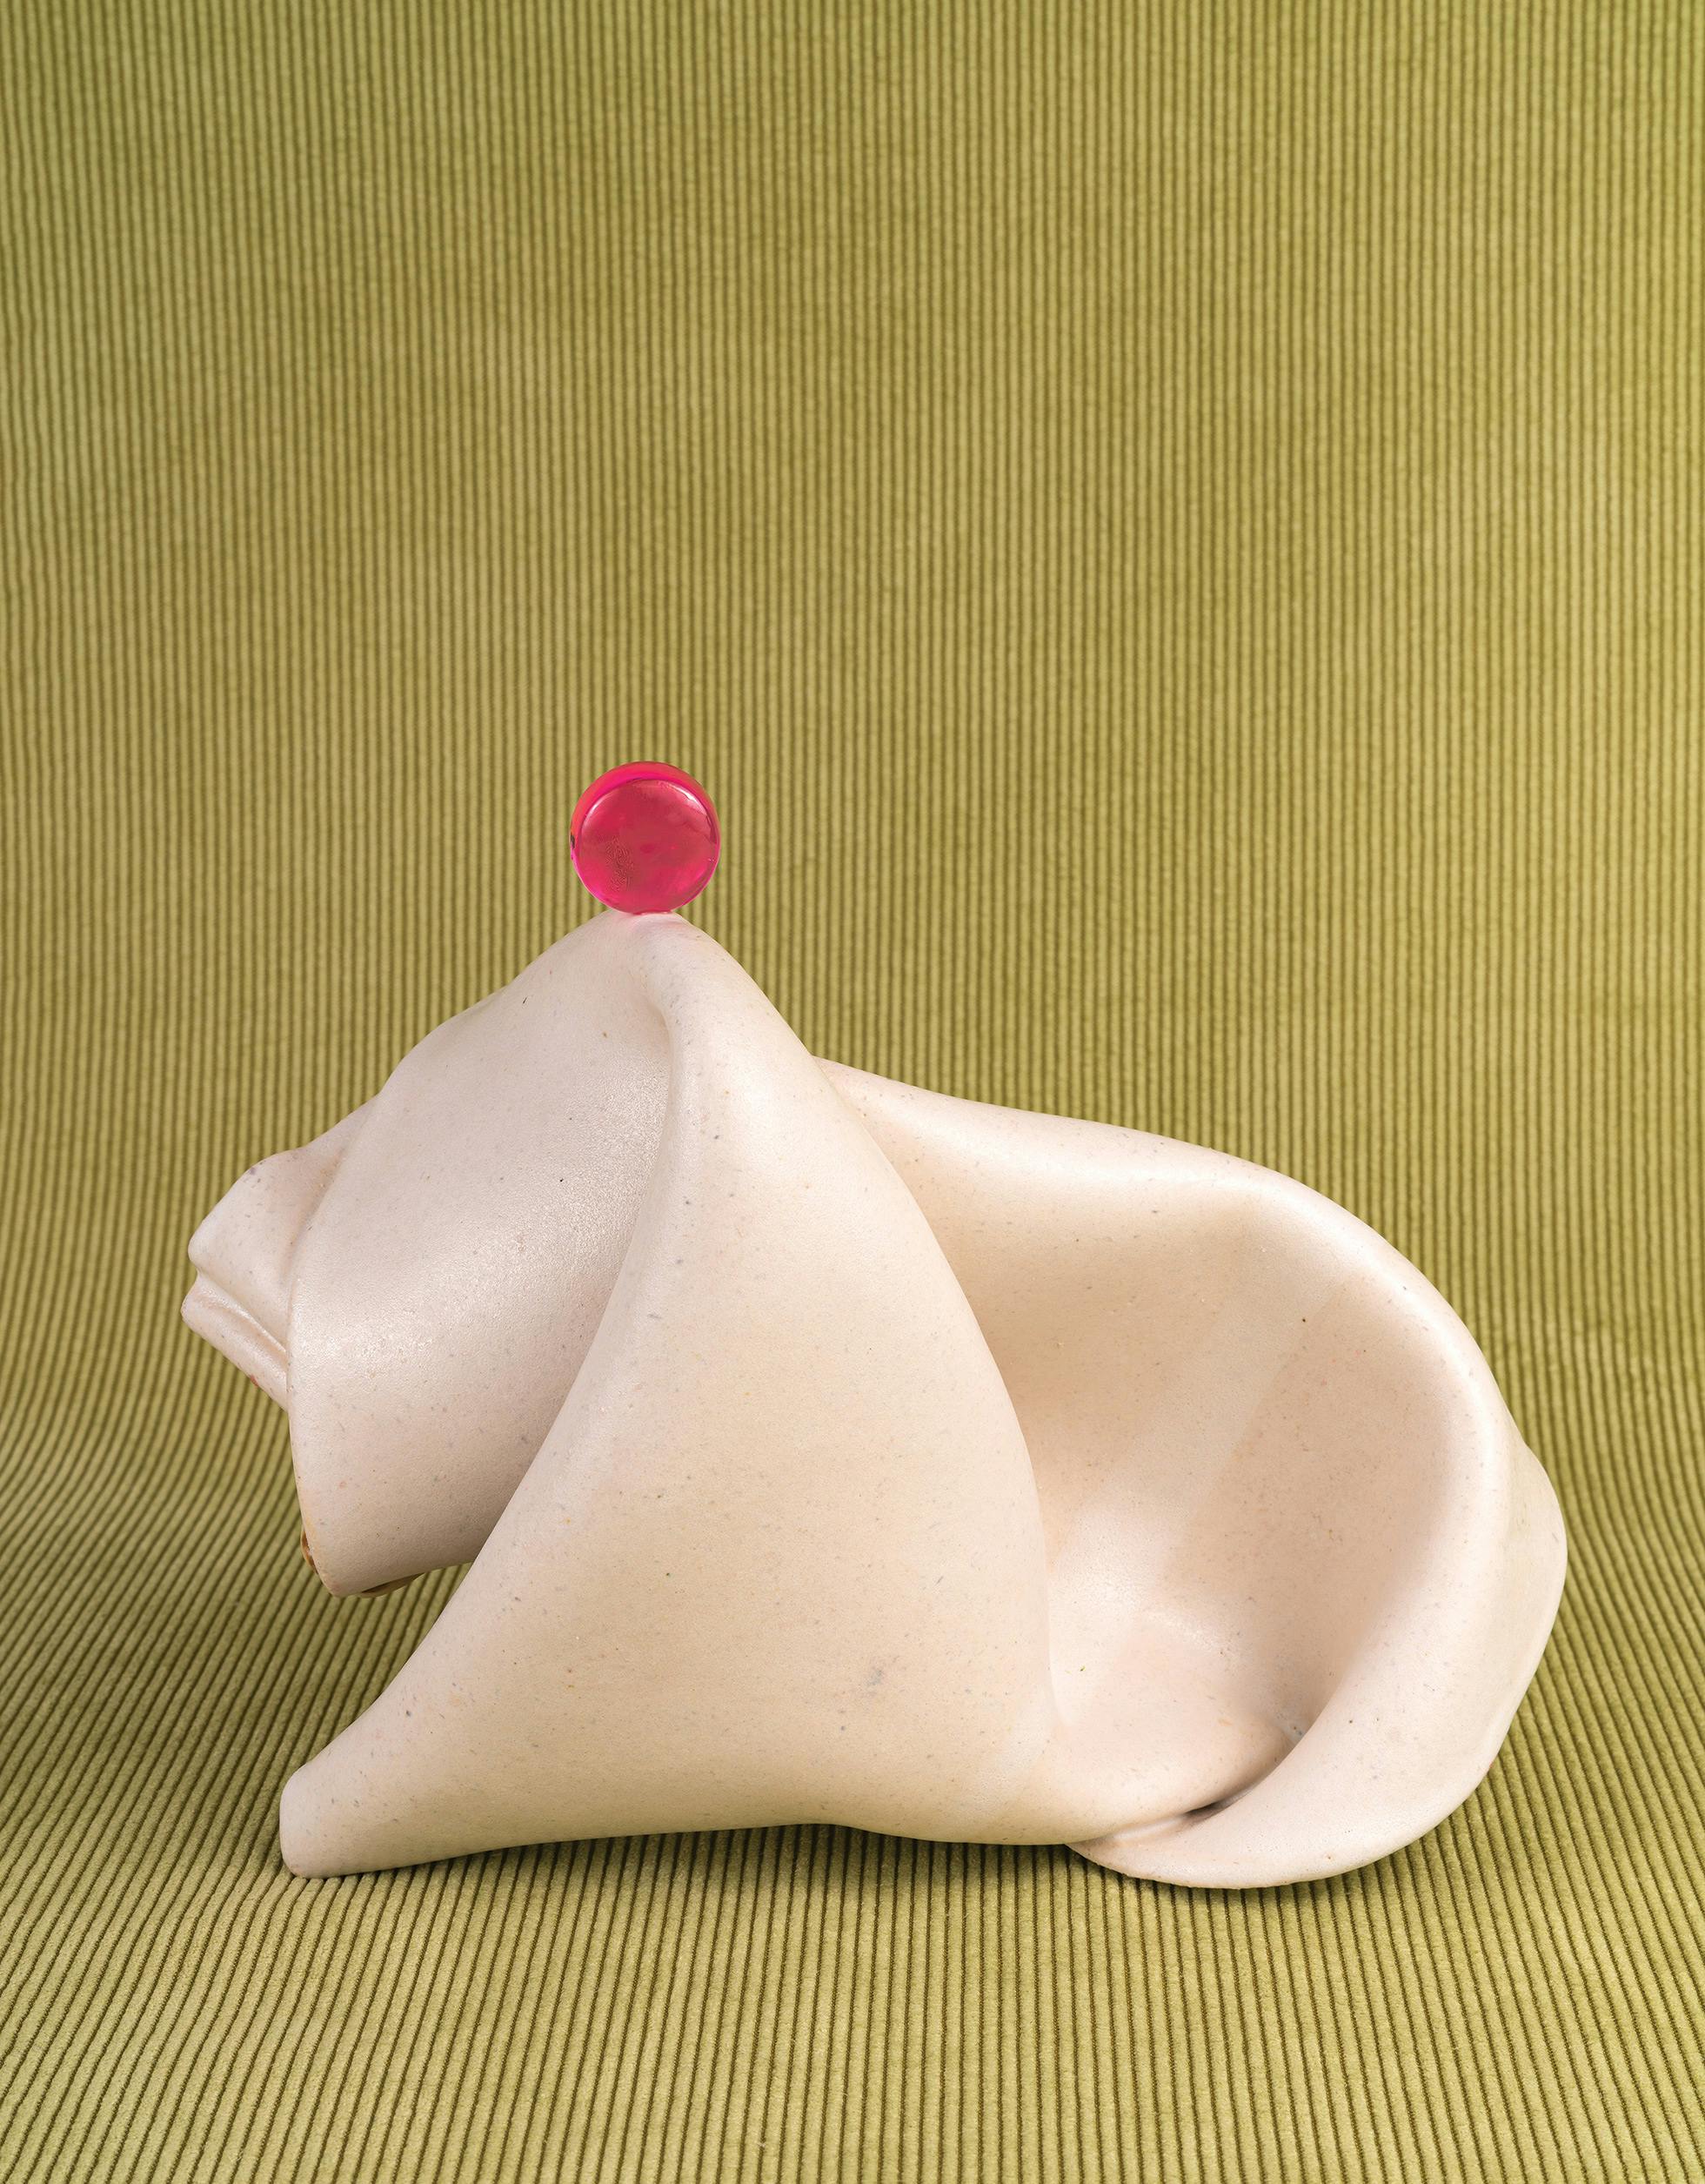 A photographic work by Michelle Bui. A folded white napkin, which balances a small pink round object at its top, is placed on a green textured backdrop.